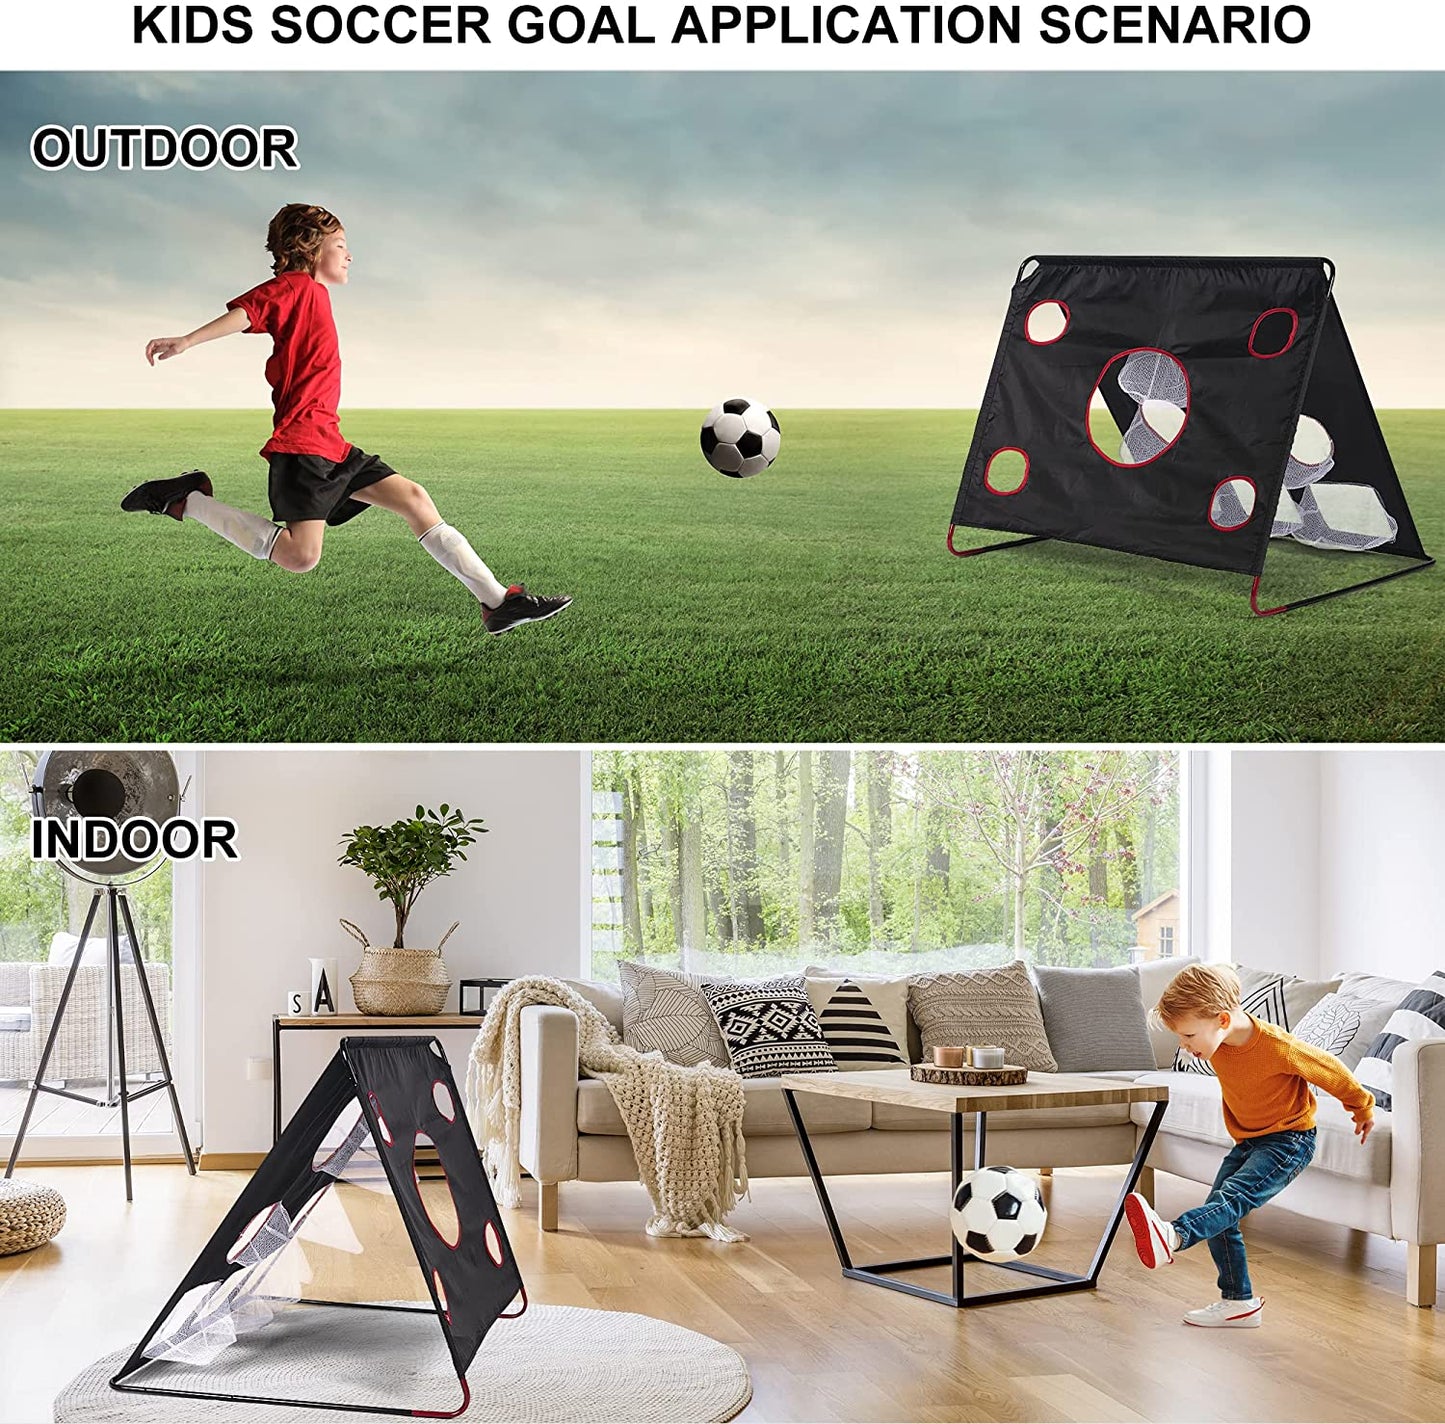 Golf Practice Net Chipping Target Pop Up Game Portable Foldable Stable for Backyard Indoor Outdoor Suitable for Mens Womens Kids and Multiple Scenes